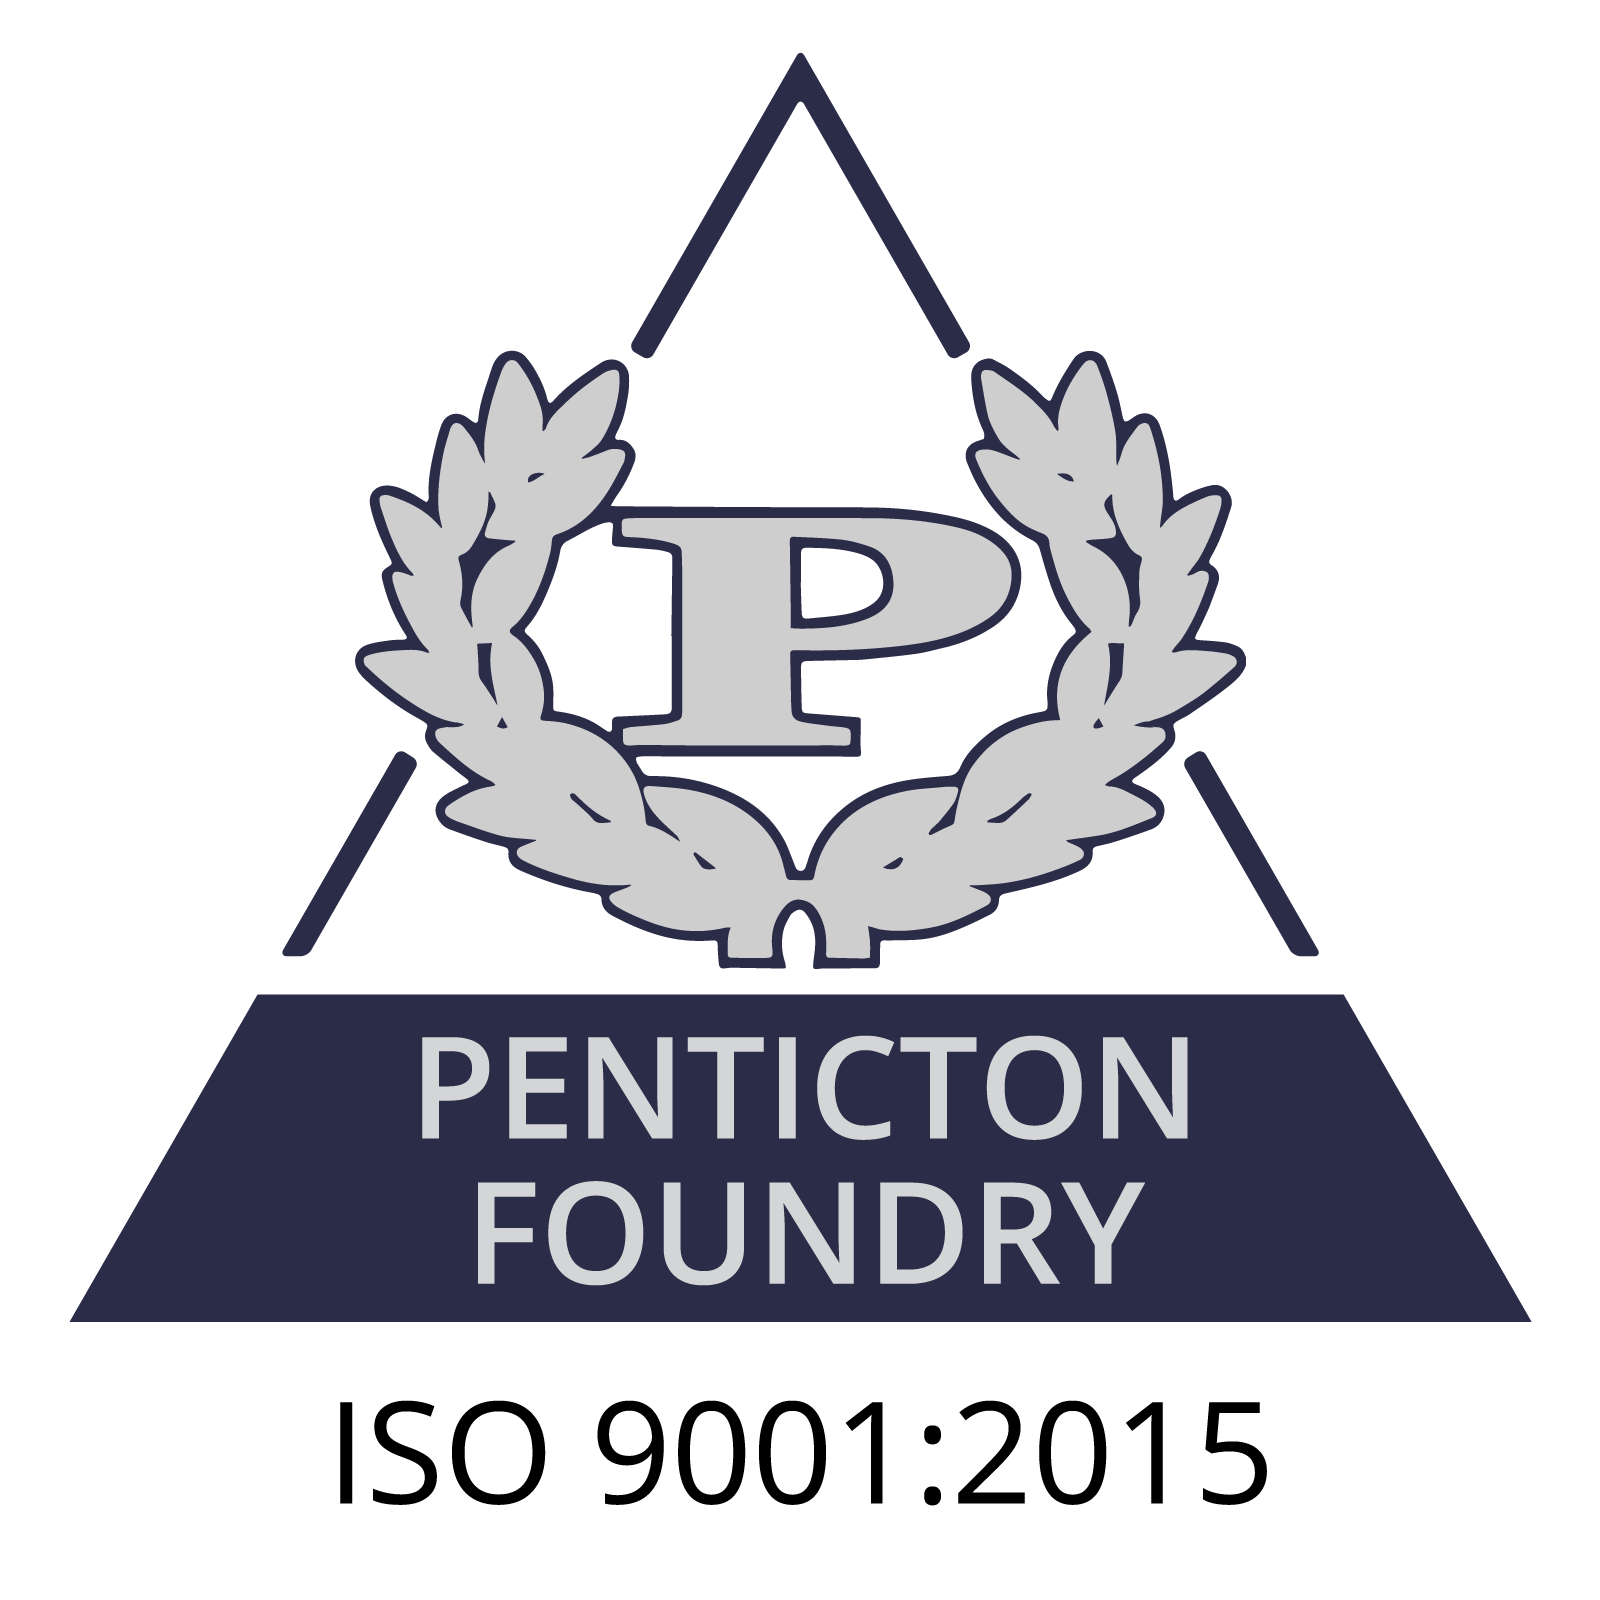 penticton-foundry-logo.png